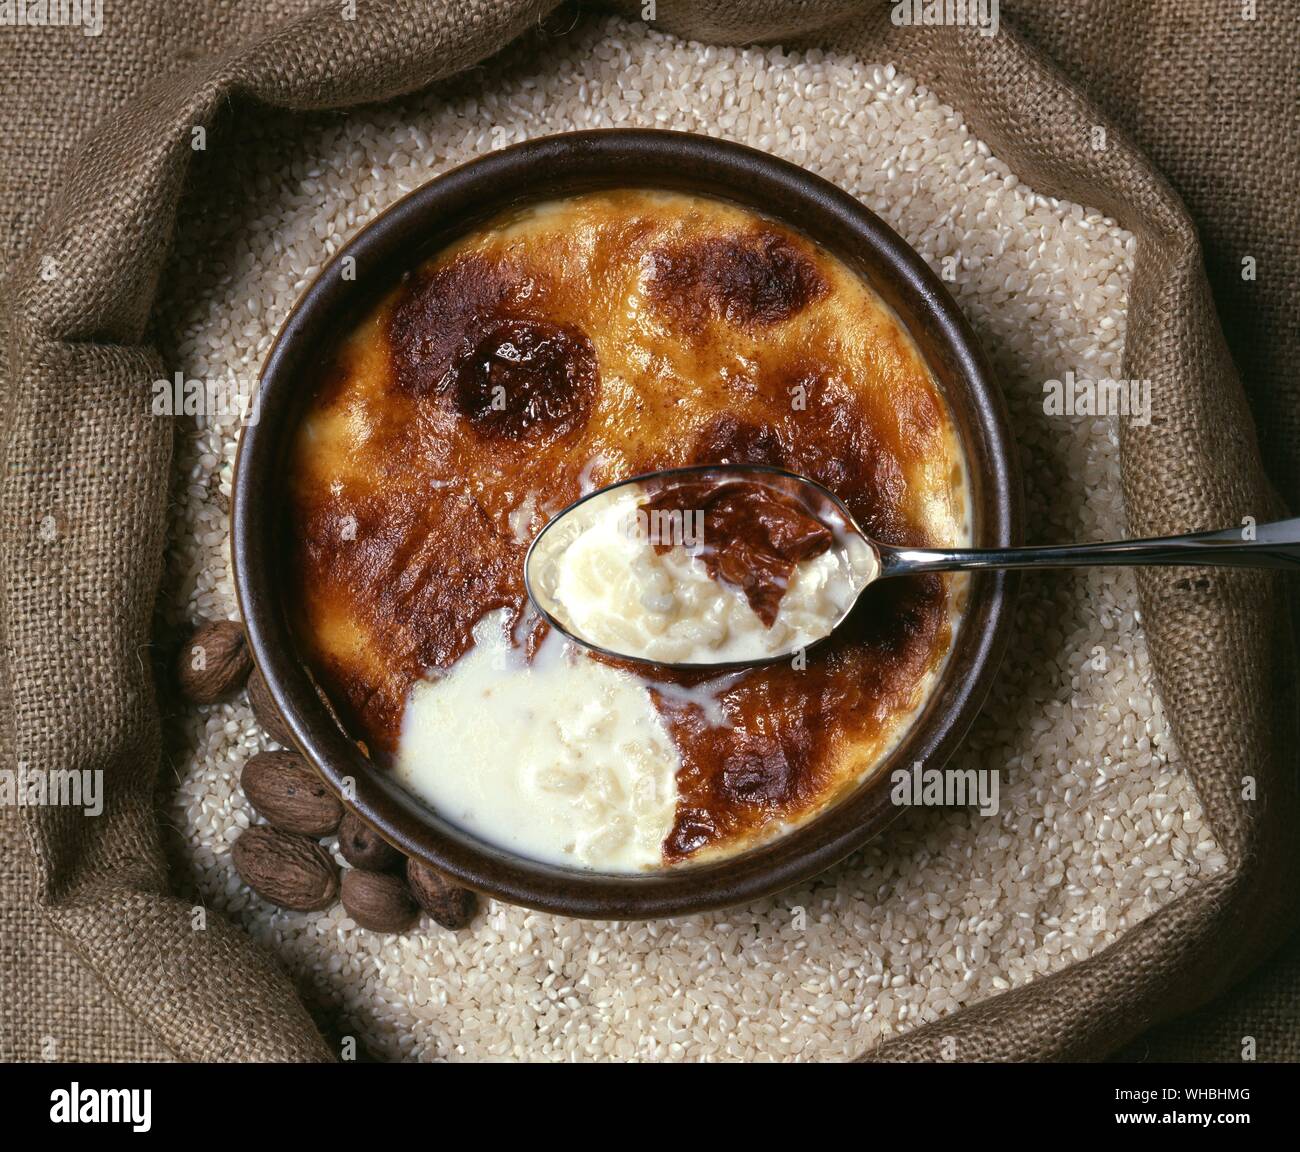 Rice Pudding : dessert enjoyed by people of different cultures all over the world,  made by combining rice with a sweetener and other ingredients Stock Photo